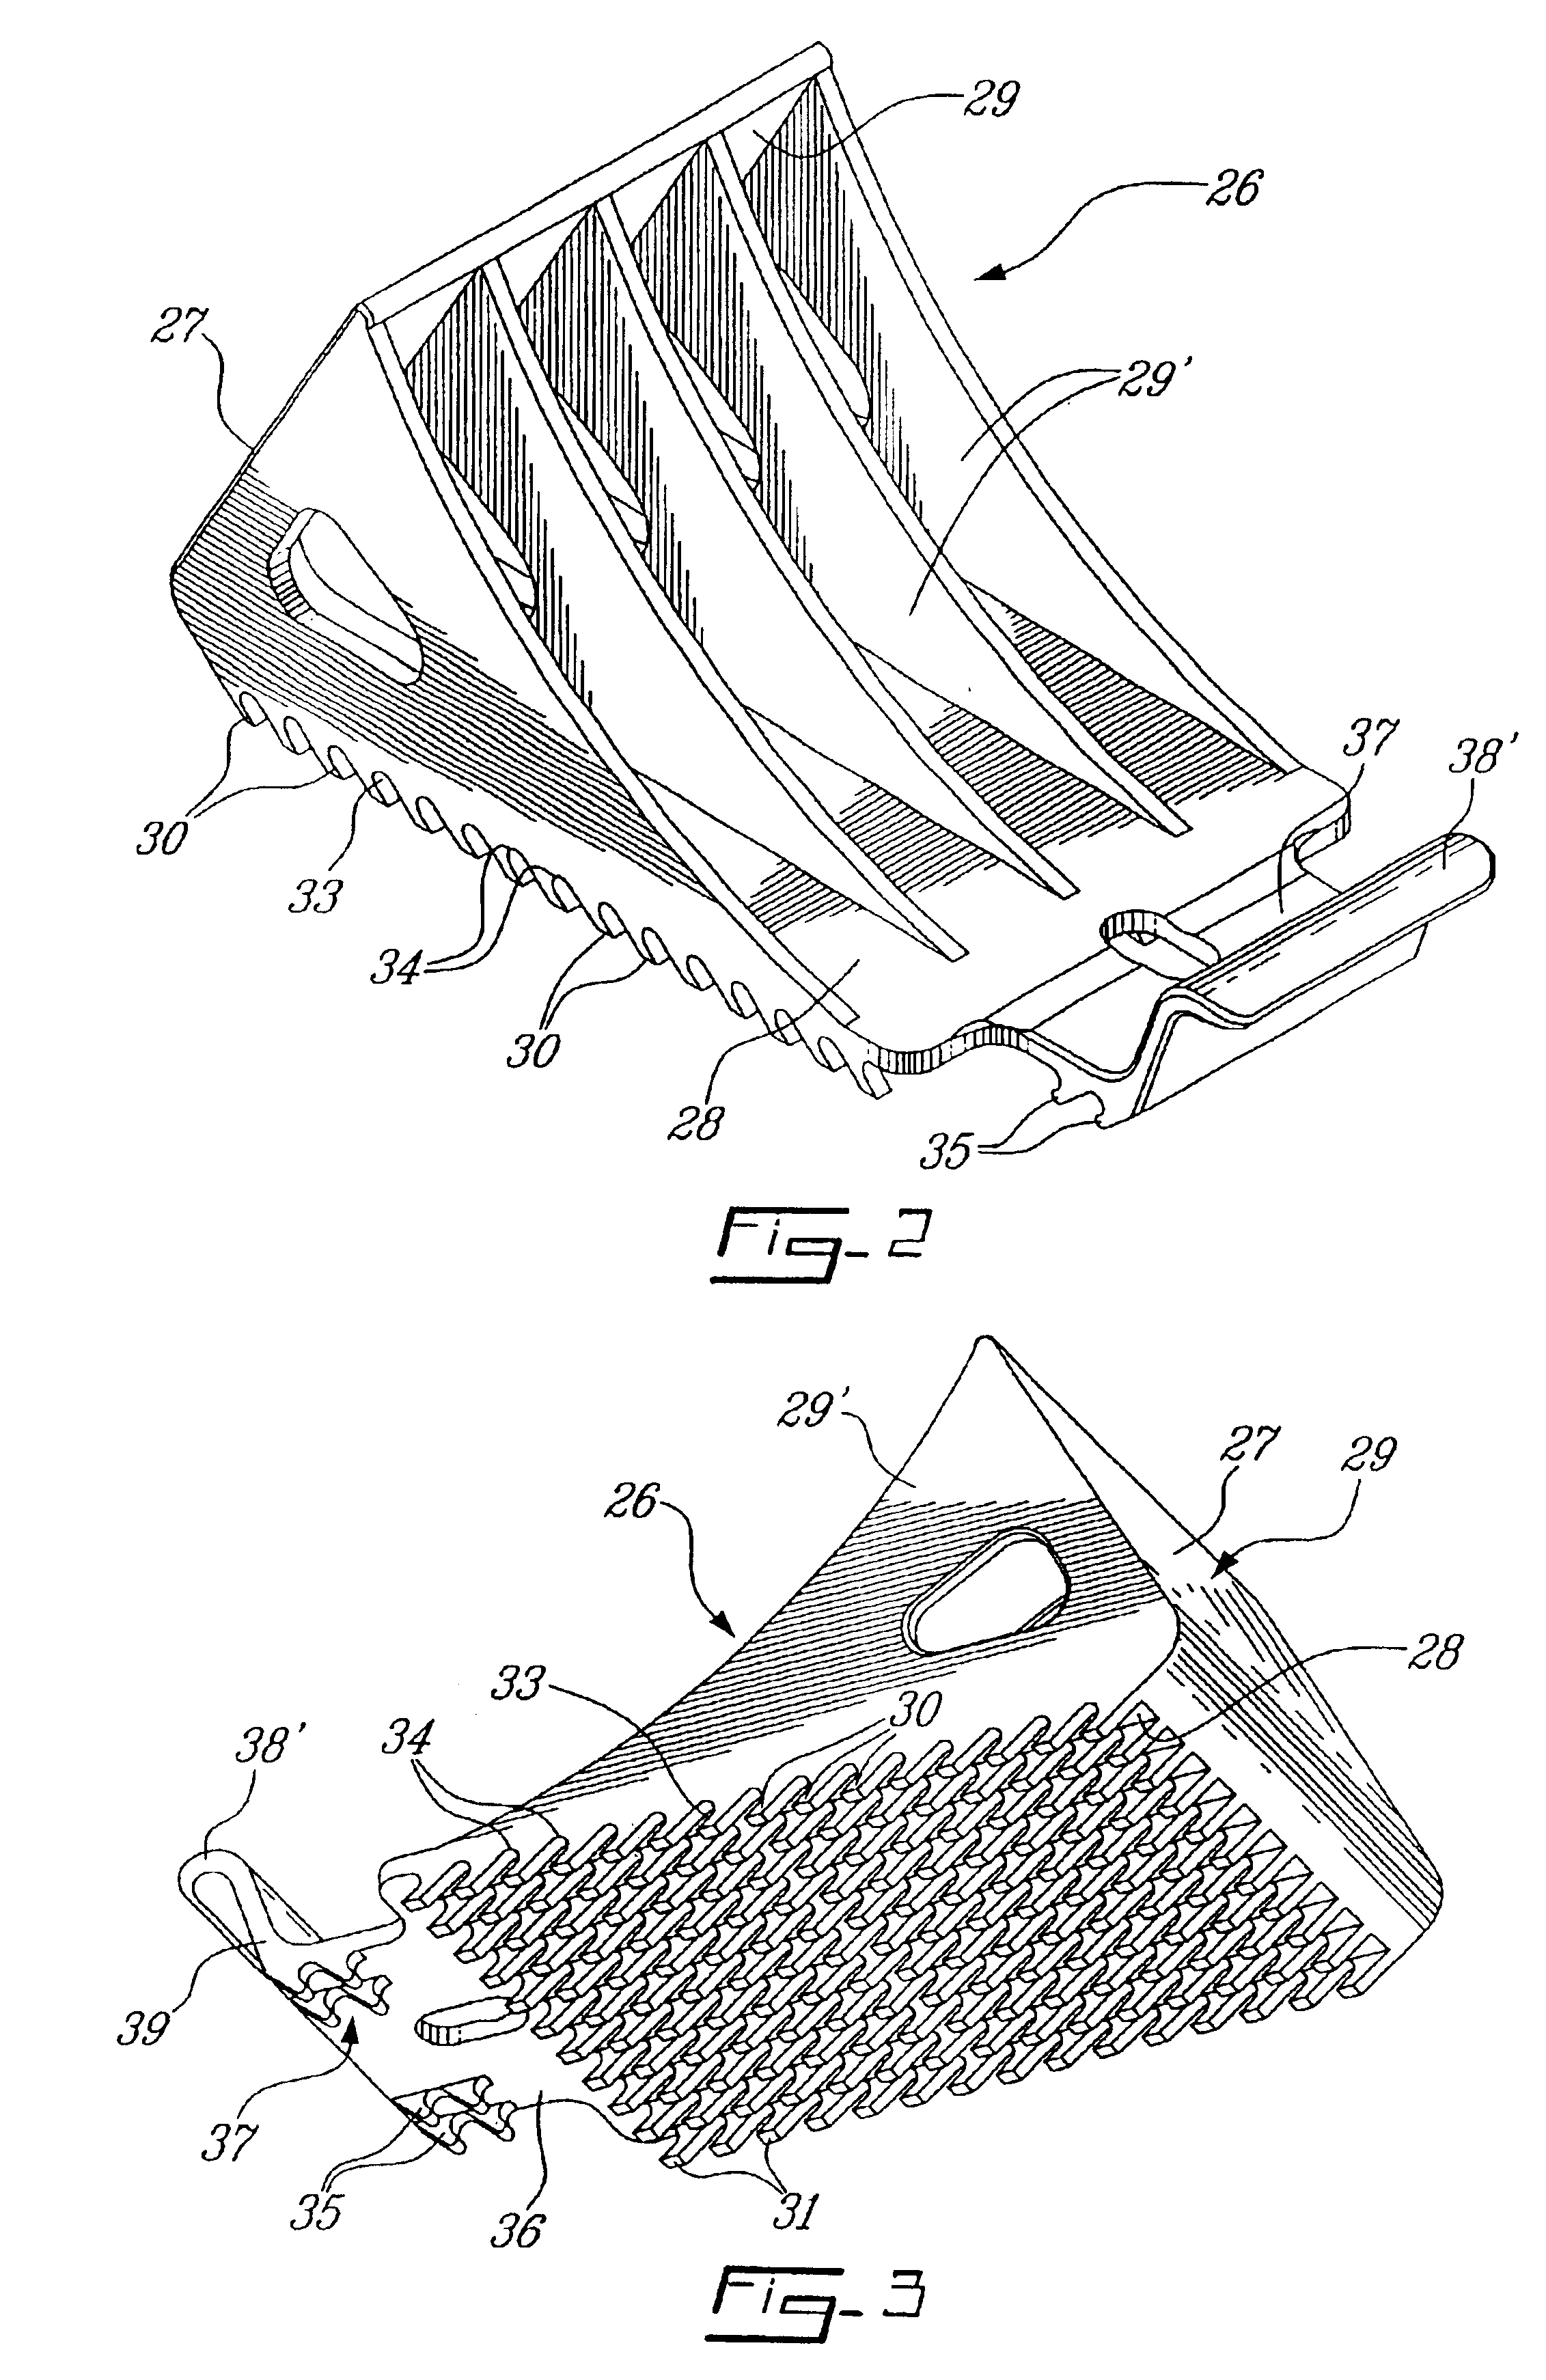 Method and system for restraining road vehicle on a transport vehicle